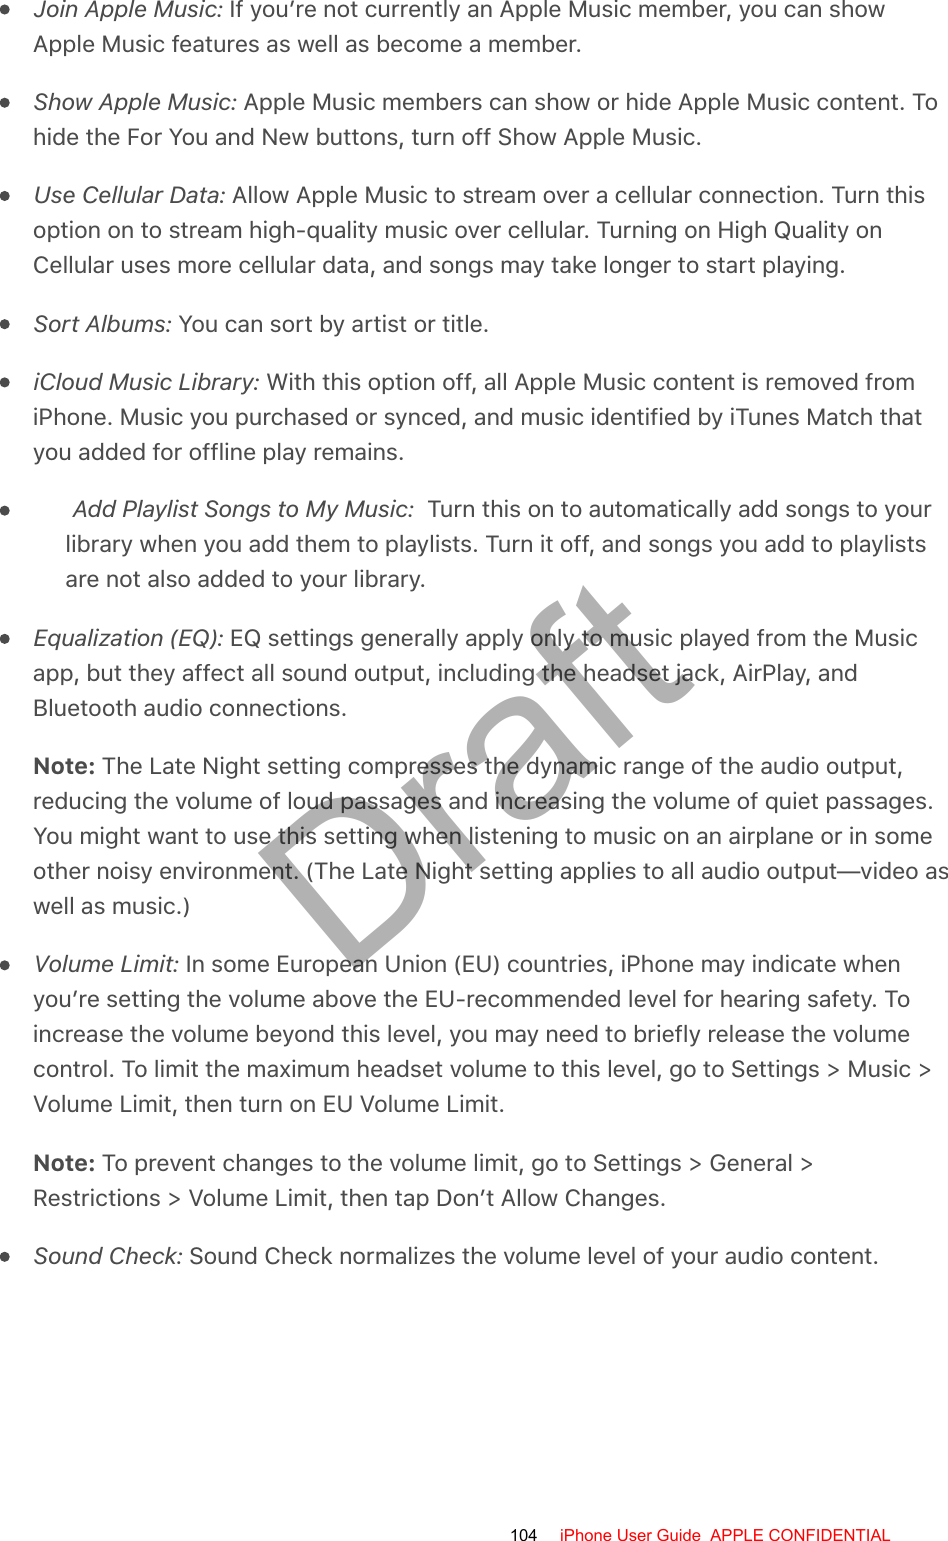 Join Apple Music: If you’re not currently an Apple Music member, you can showApple Music features as well as become a member.Show Apple Music: Apple Music members can show or hide Apple Music content. Tohide the For You and New buttons, turn off Show Apple Music.Use Cellular Data: Allow Apple Music to stream over a cellular connection. Turn thisoption on to stream high-quality music over cellular. Turning on High Quality onCellular uses more cellular data, and songs may take longer to start playing.Sort Albums: You can sort by artist or title.iCloud Music Library: With this option off, all Apple Music content is removed fromiPhone. Music you purchased or synced, and music identified by iTunes Match thatyou added for offline play remains.Add Playlist Songs to My Music:  Turn this on to automatically add songs to yourlibrary when you add them to playlists. Turn it off, and songs you add to playlistsare not also added to your library.Equalization (EQ): EQ settings generally apply only to music played from the Musicapp, but they affect all sound output, including the headset jack, AirPlay, andBluetooth audio connections.Note: The Late Night setting compresses the dynamic range of the audio output,reducing the volume of loud passages and increasing the volume of quiet passages.You might want to use this setting when listening to music on an airplane or in someother noisy environment. (The Late Night setting applies to all audio output—video aswell as music.)Volume Limit: In some European Union (EU) countries, iPhone may indicate whenyou’re setting the volume above the EU-recommended level for hearing safety. Toincrease the volume beyond this level, you may need to briefly release the volumecontrol. To limit the maximum headset volume to this level, go to Settings &gt; Music &gt;Volume Limit, then turn on EU Volume Limit.Note: To prevent changes to the volume limit, go to Settings &gt; General &gt;Restrictions &gt; Volume Limit, then tap Don’t Allow Changes.Sound Check: Sound Check normalizes the volume level of your audio content.104 iPhone User Guide  APPLE CONFIDENTIALDraft